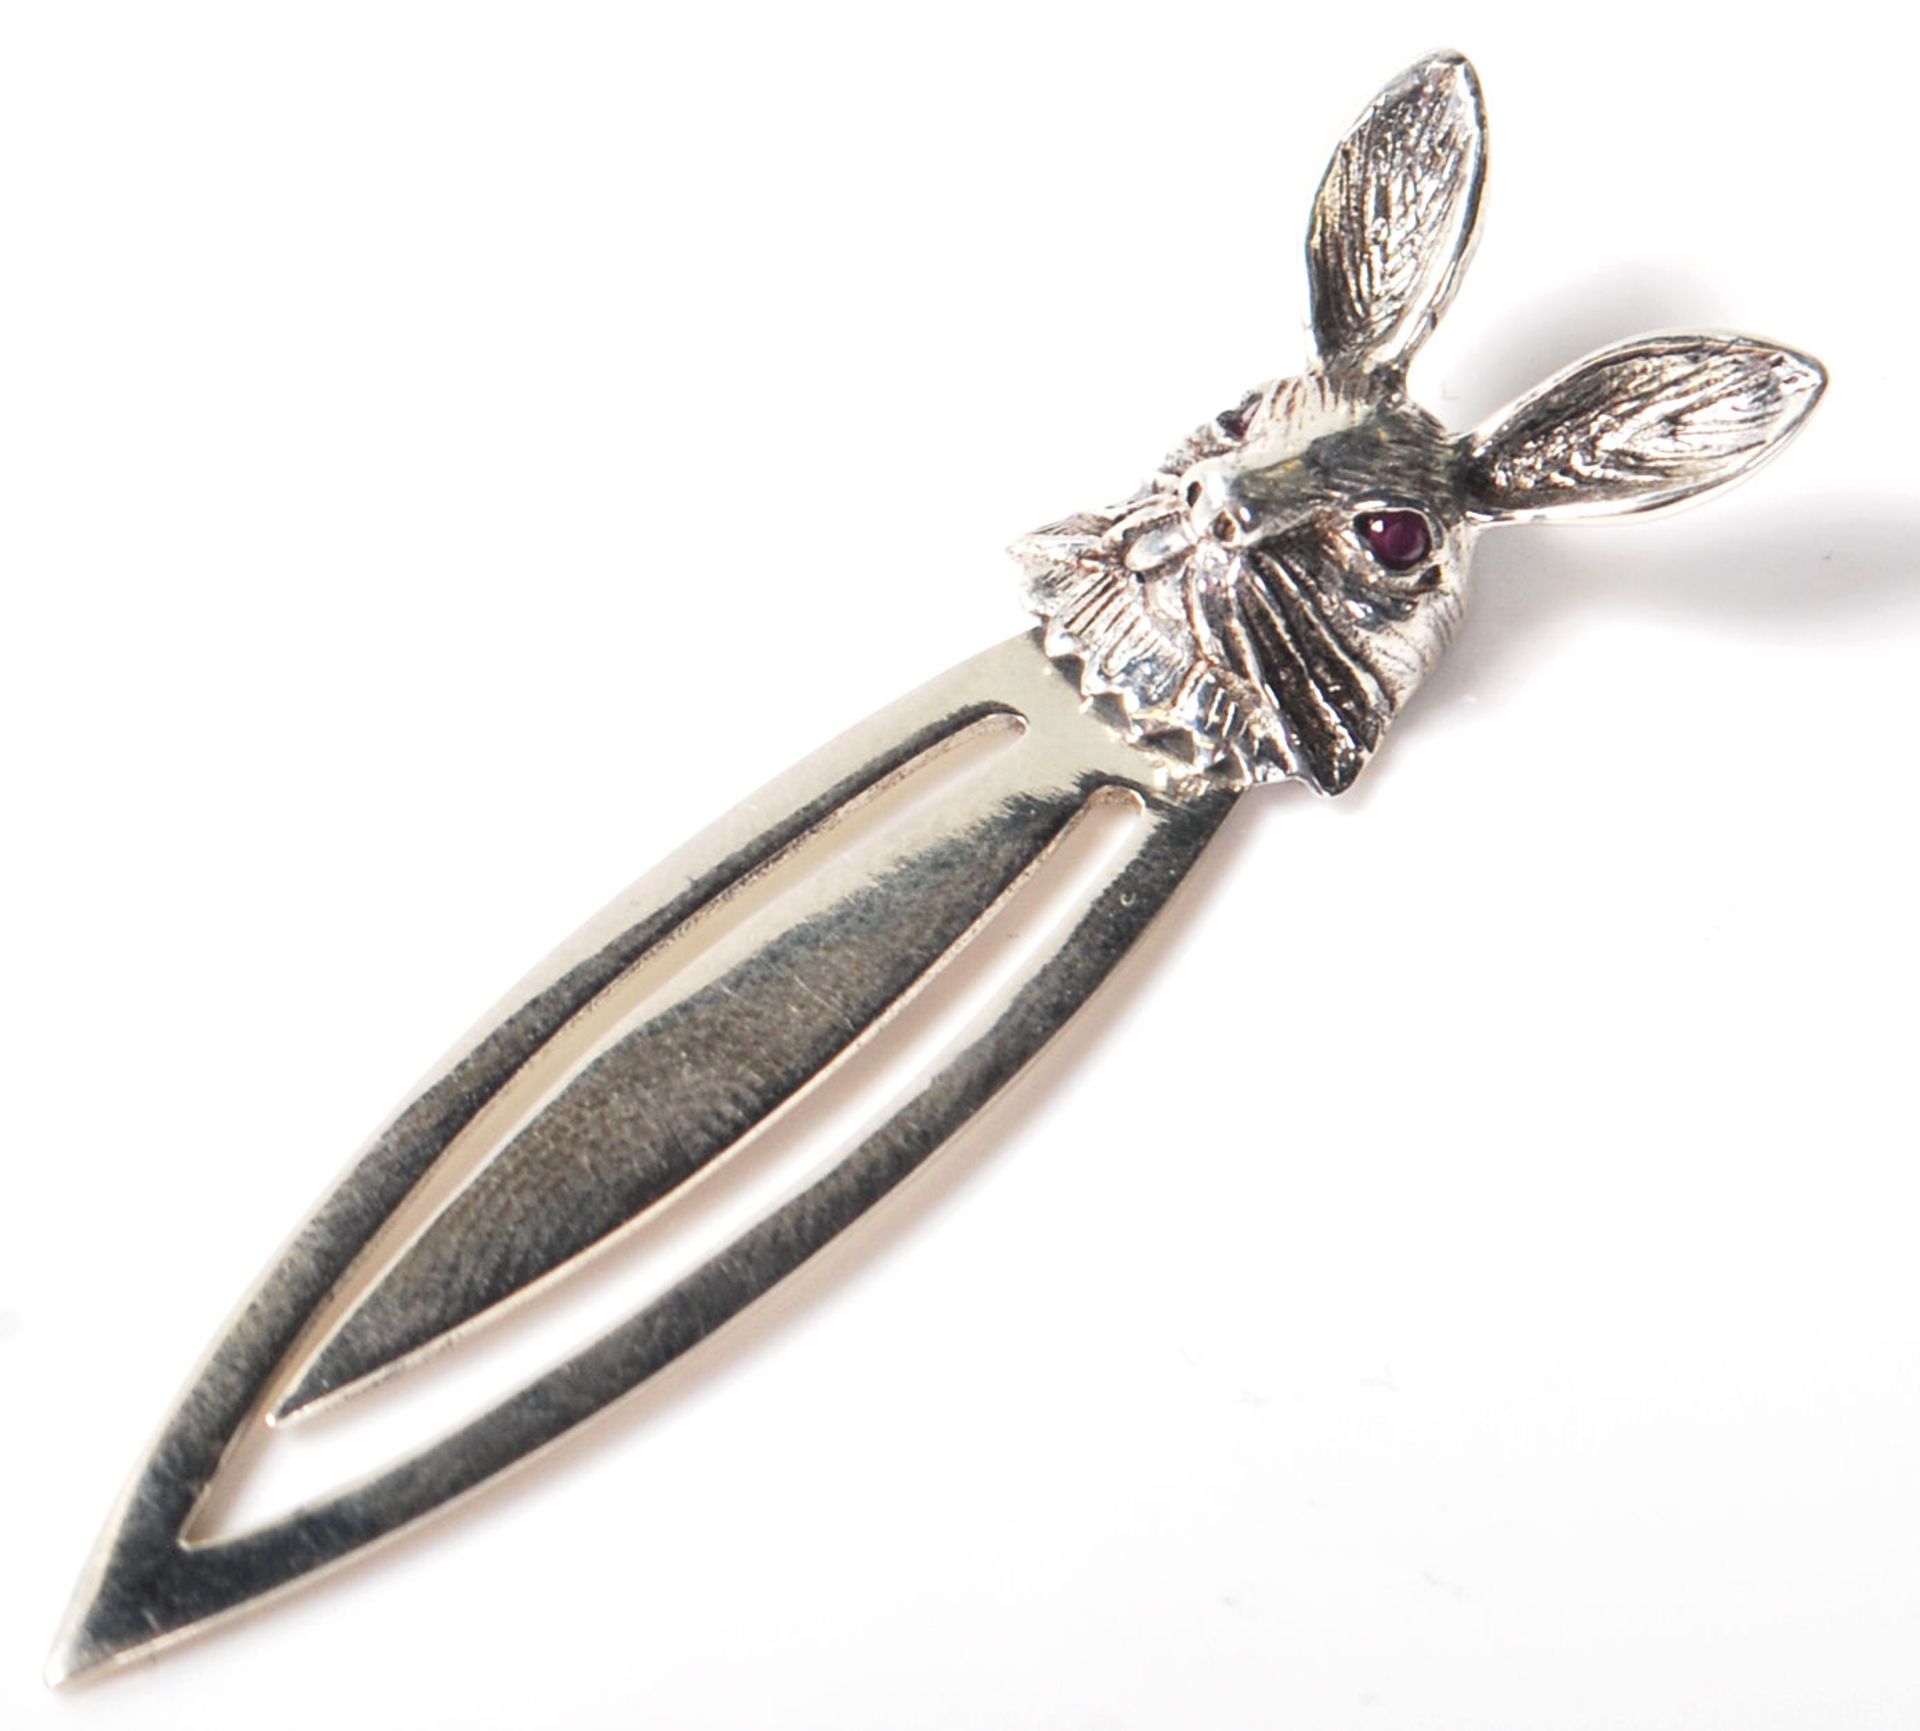 A sterling silver bookmark having a rabbits head finial and inset with red stones. Weighs 4g.